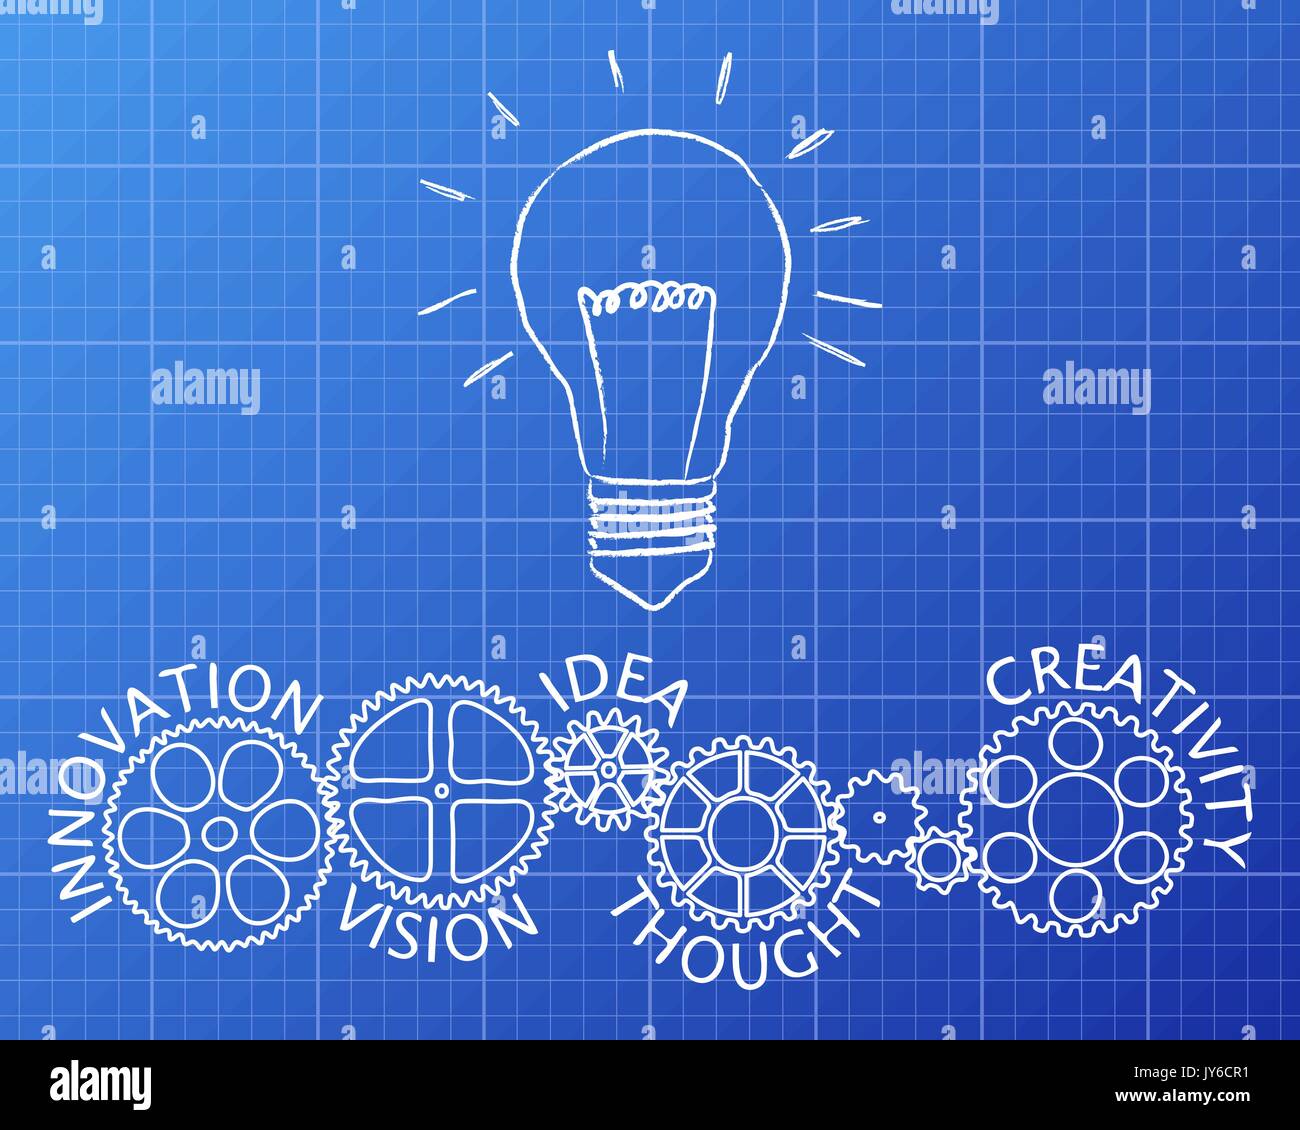 Light bulb and gear wheels with innovative words drawing on blueprint background Stock Vector